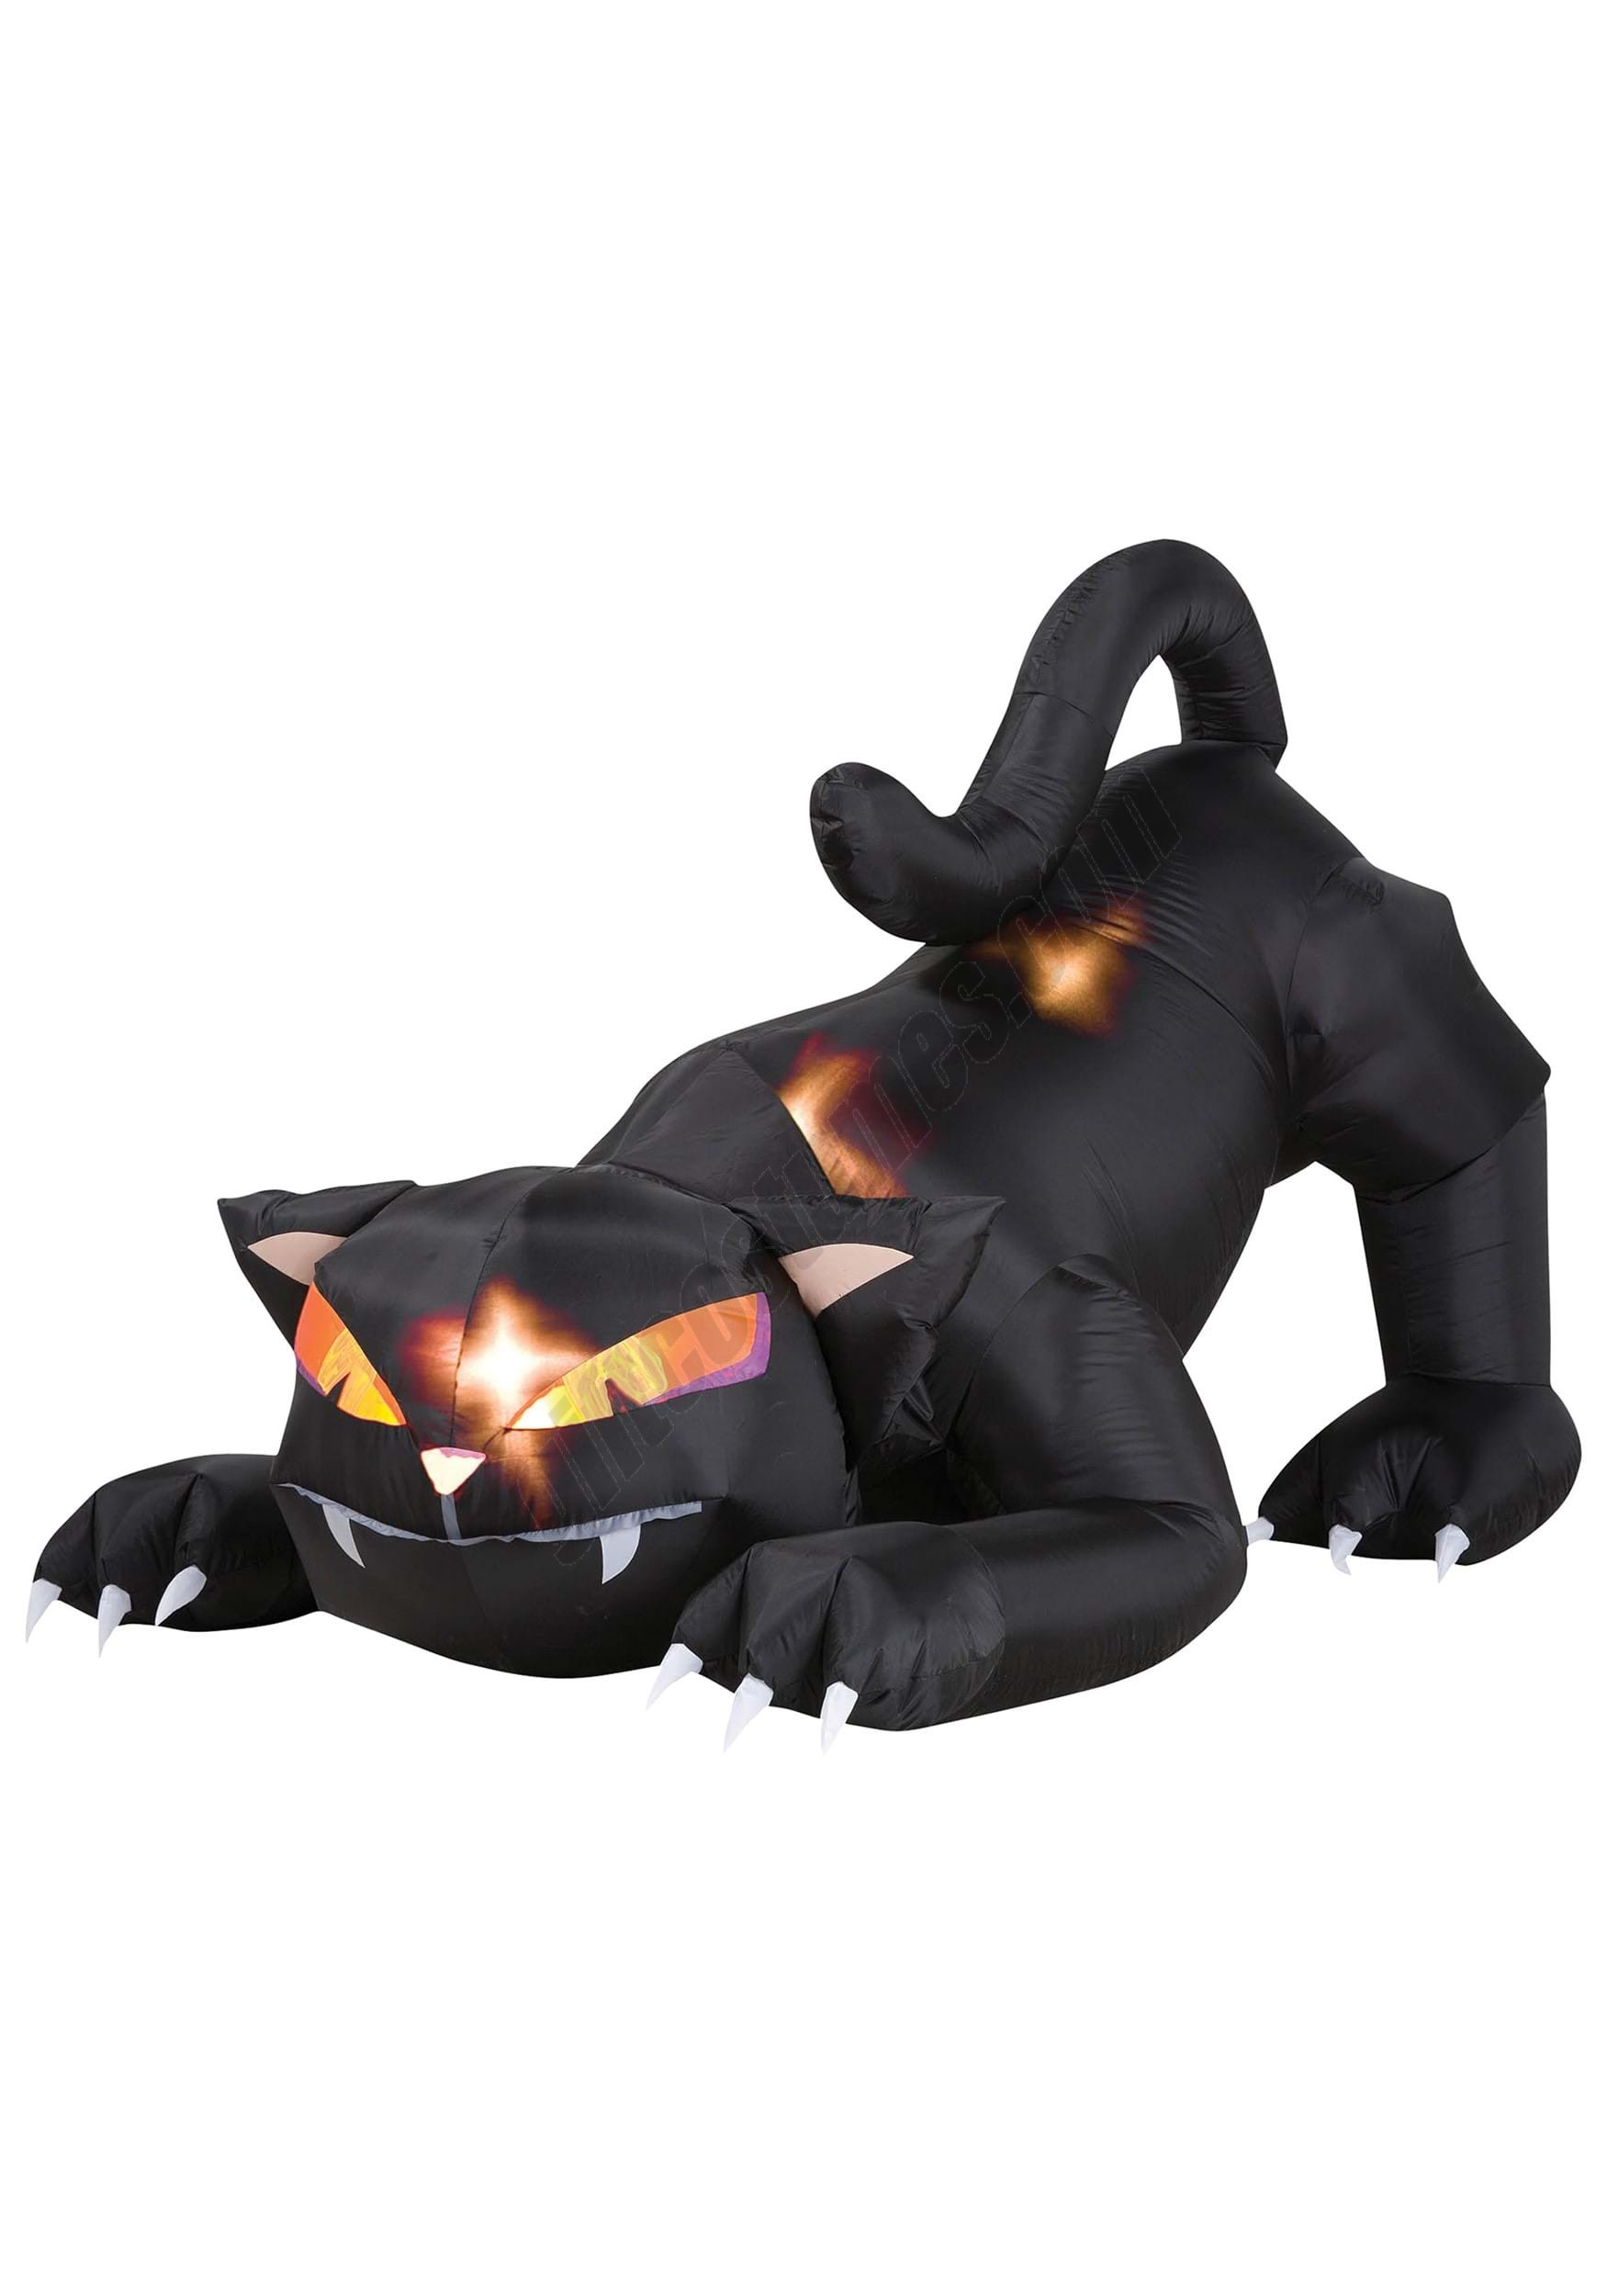 Black Cat With Turning Head 48" Decoration Promotions - Black Cat With Turning Head 48" Decoration Promotions